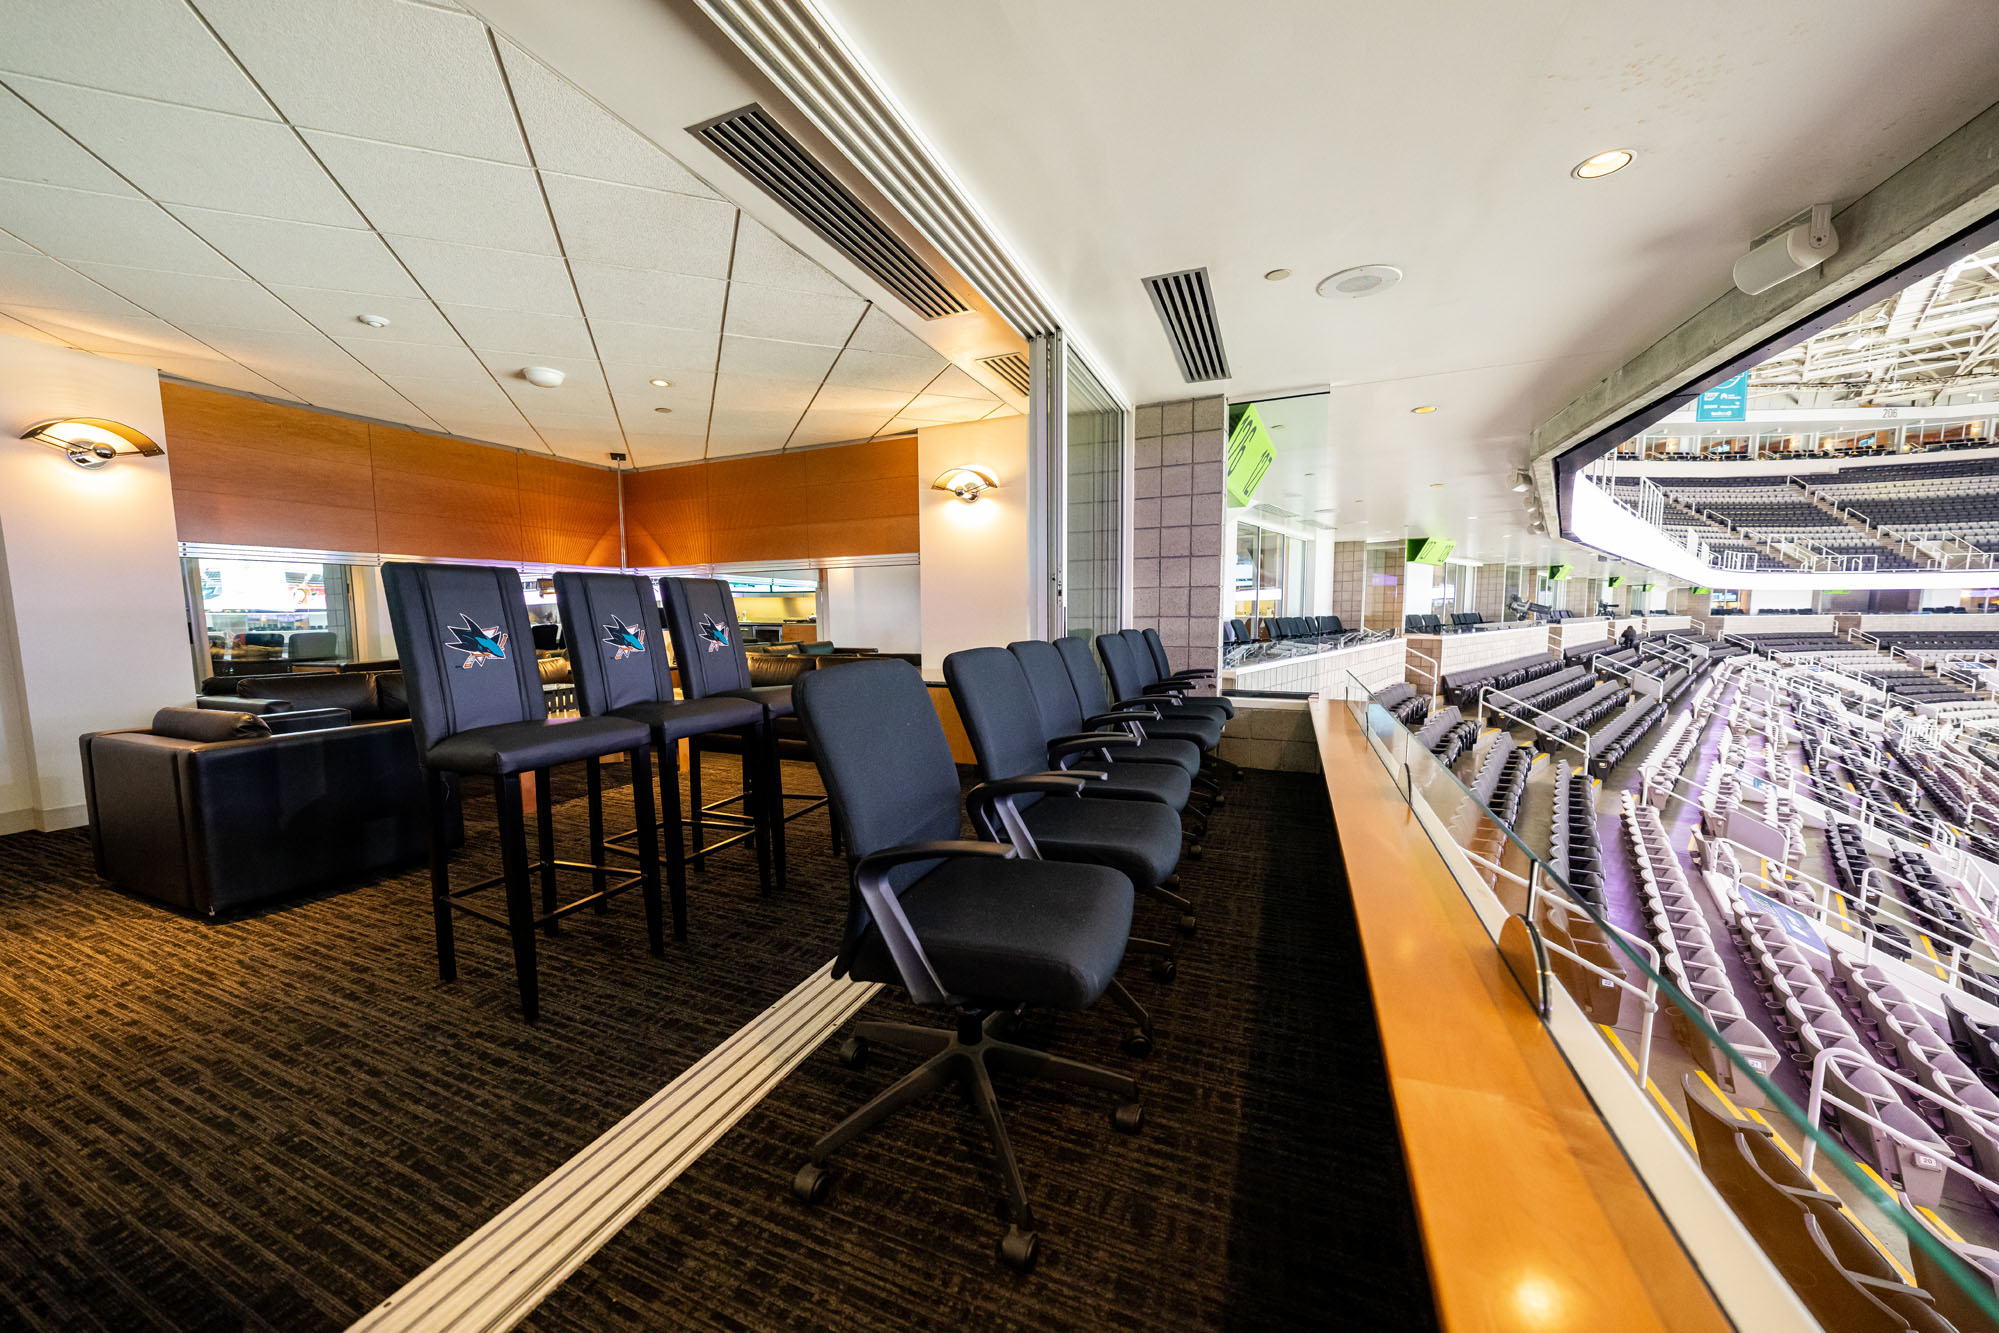 San Jose Sharks are adding new premium area called the Penthouse Lounge to  SAP Center